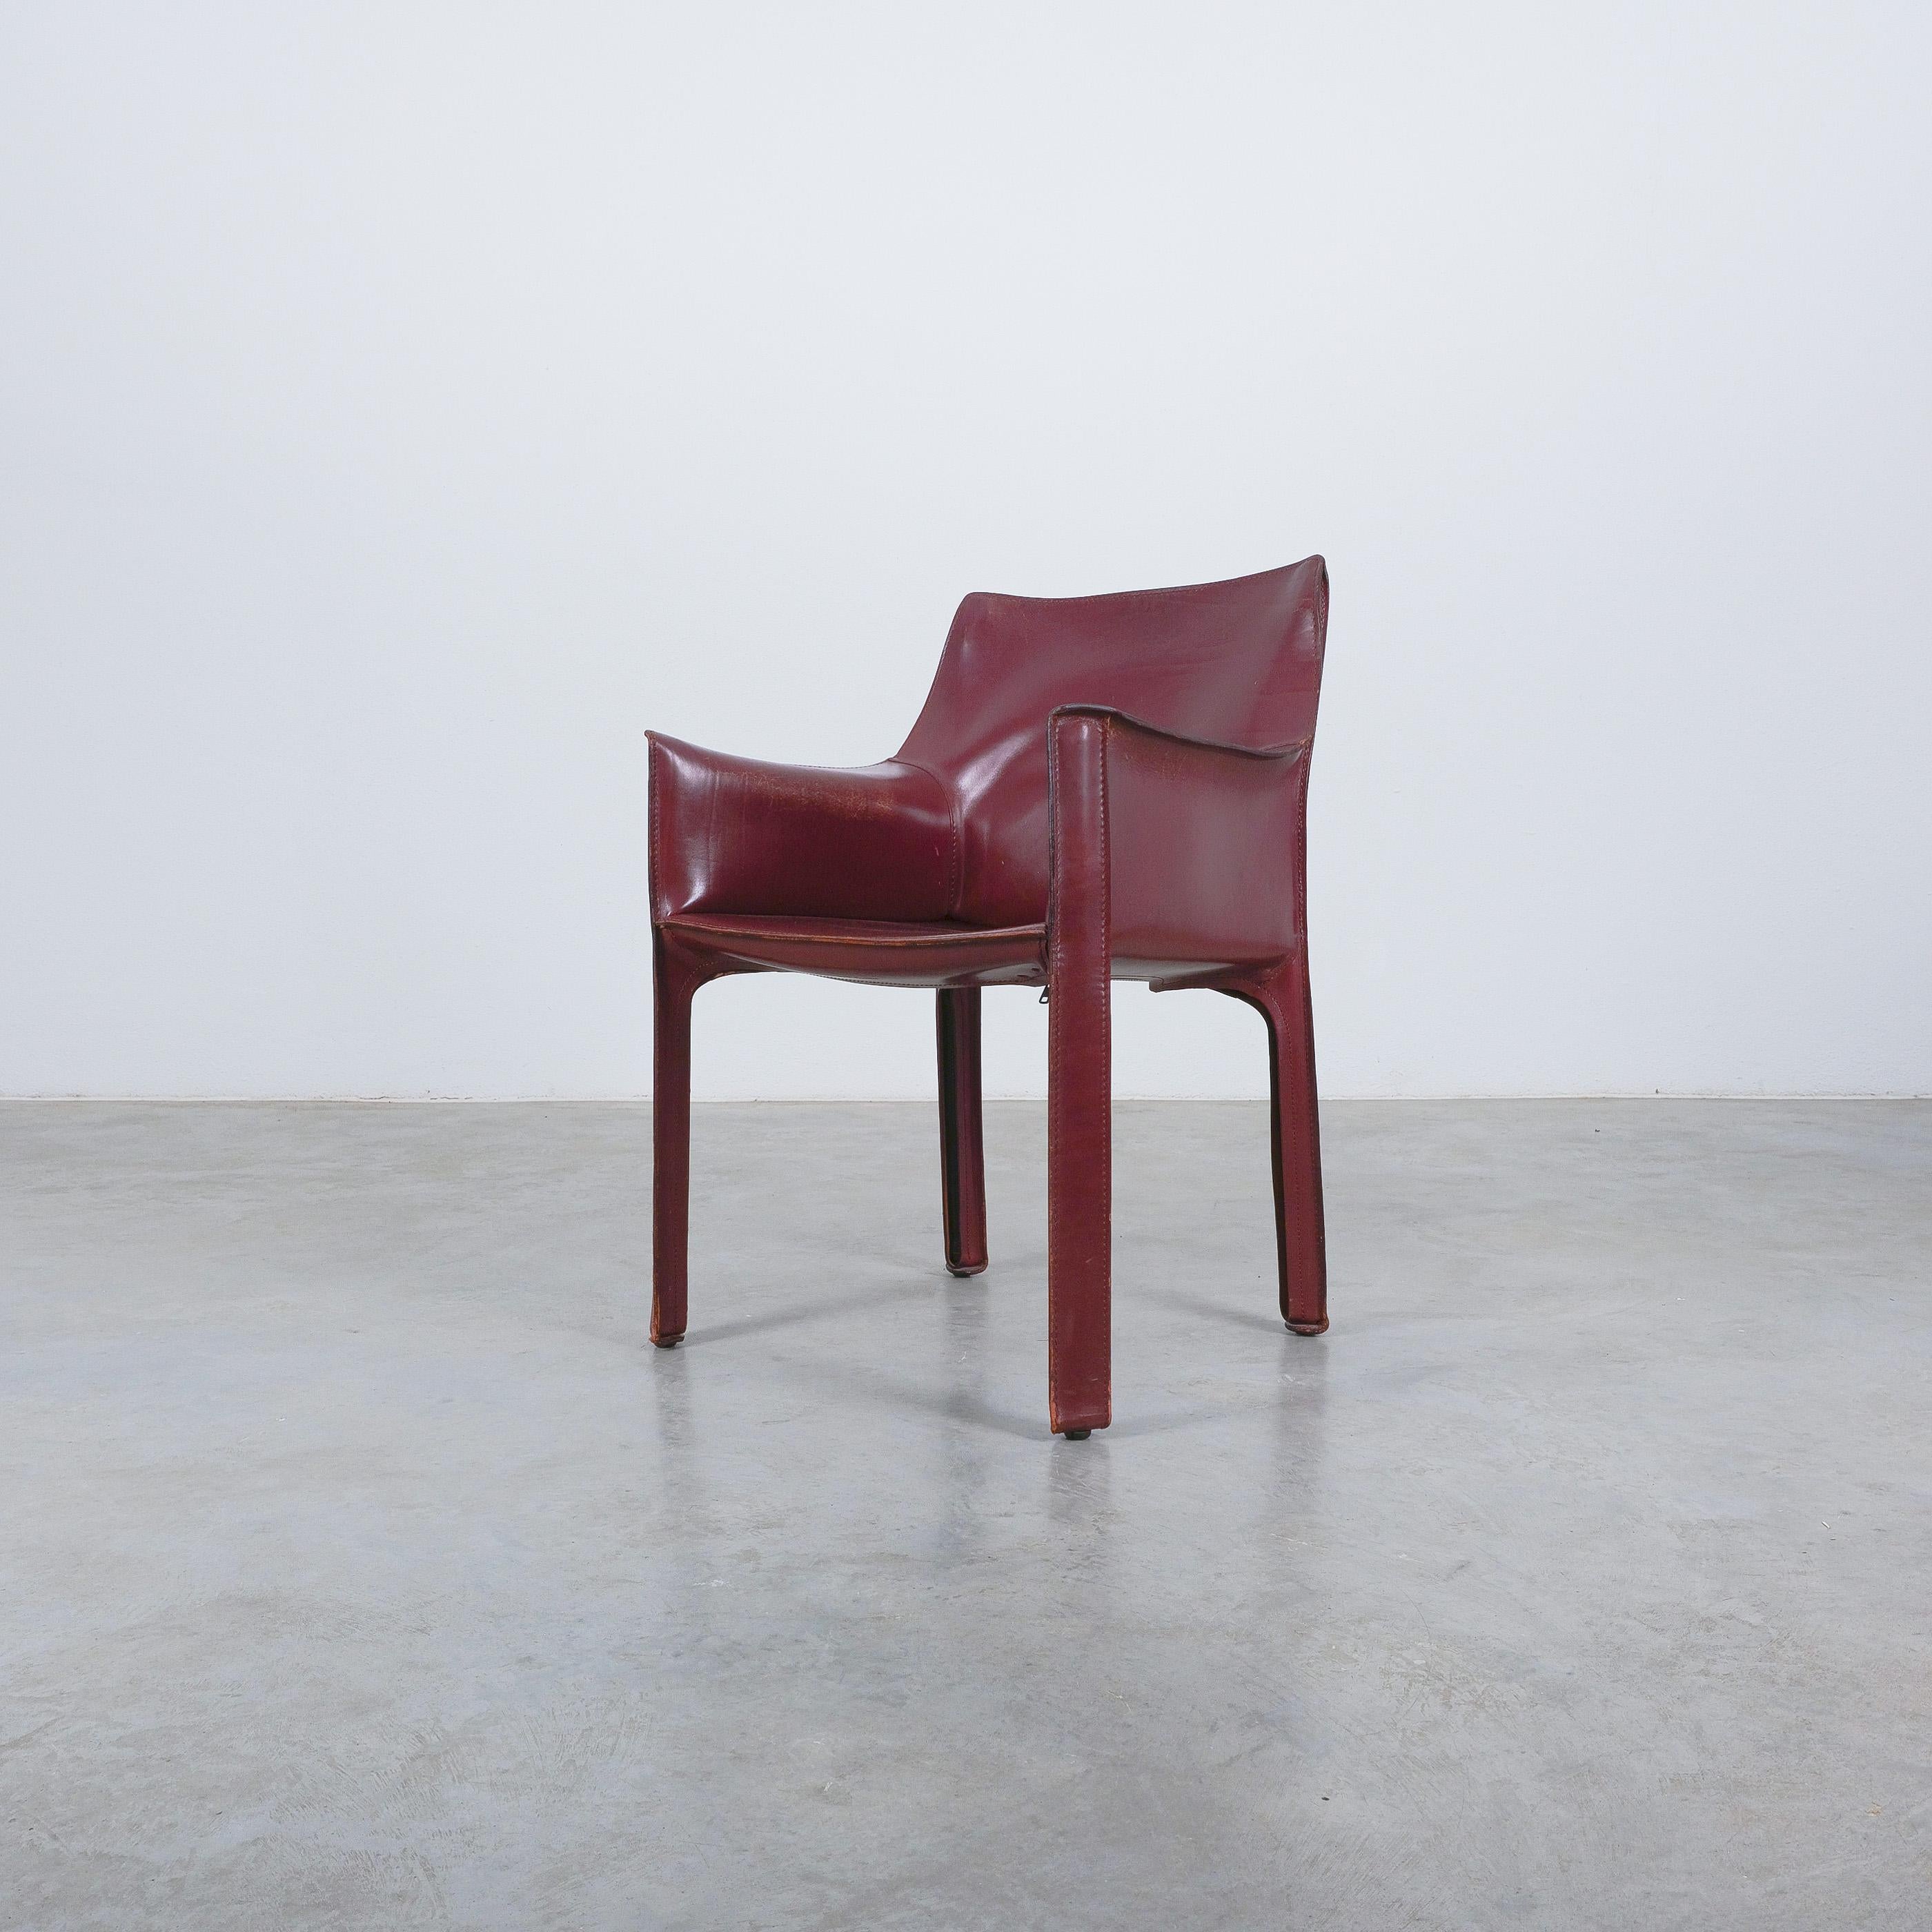 Mario Bellini Cassina Cab 413 Burgundy Red Leather Dining Chairs, 1980 For Sale 1